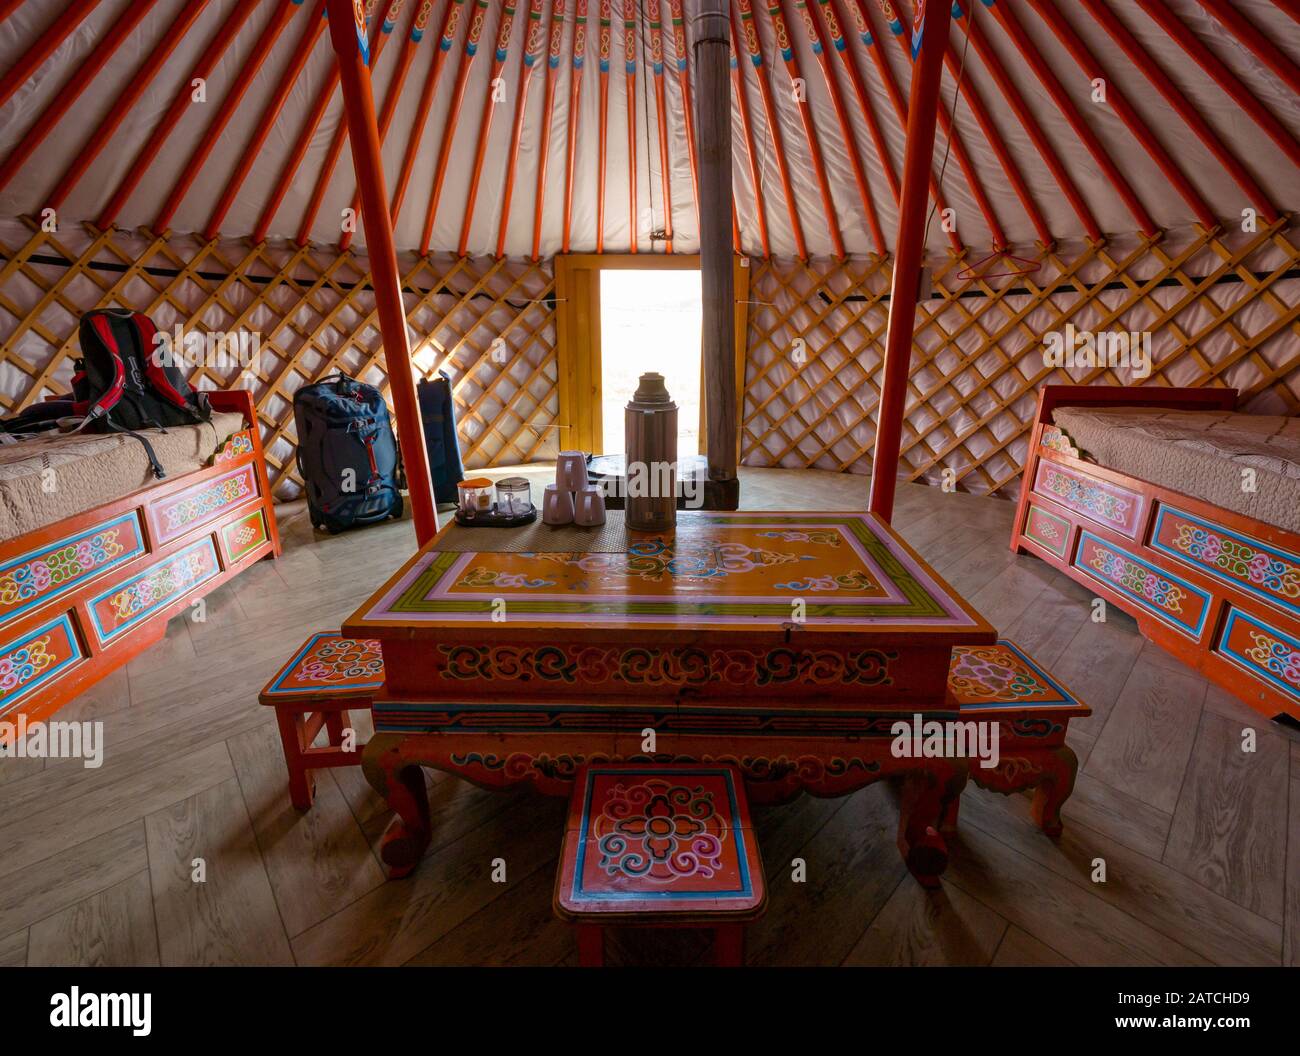 Interior of Mongoilan ger or yurt with decorative wooden table & beds, Hustai or Khustain Nuruu National Park, Tov Province, Mongolia, Asia Stock Photo